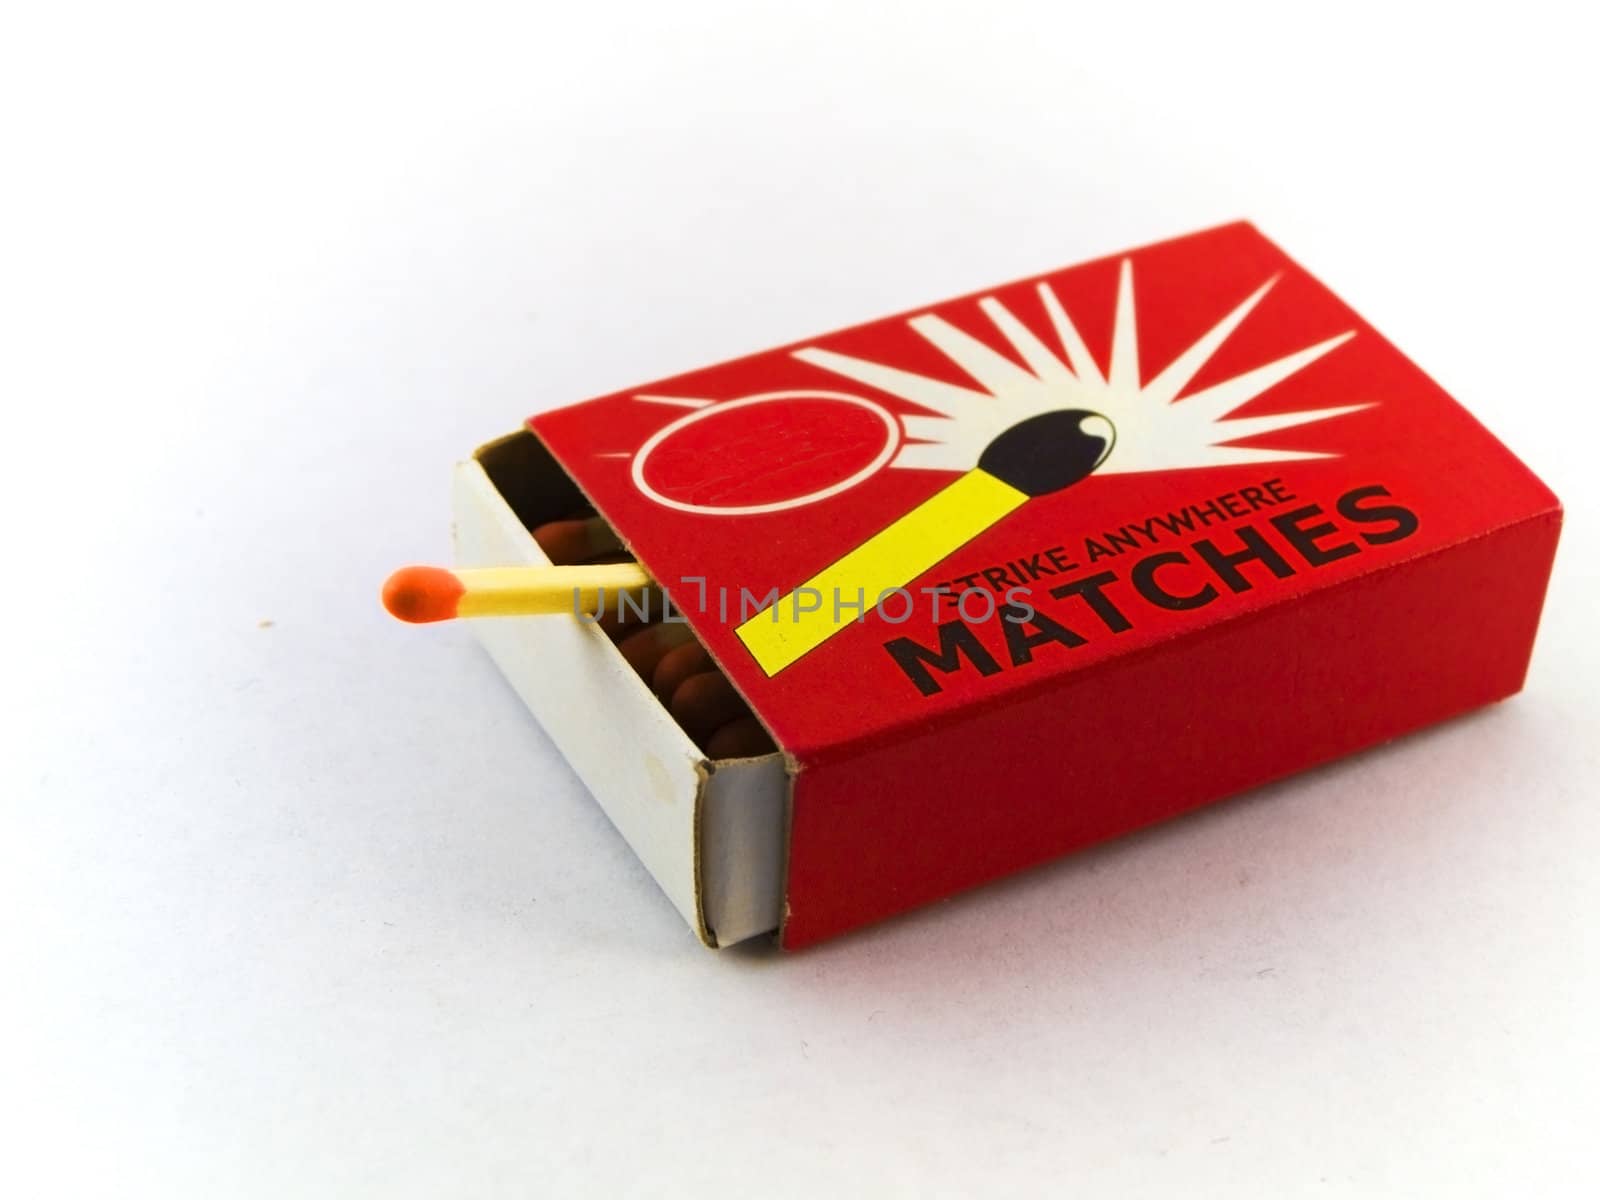 Matches and Matchbox on White Background by bobbigmac